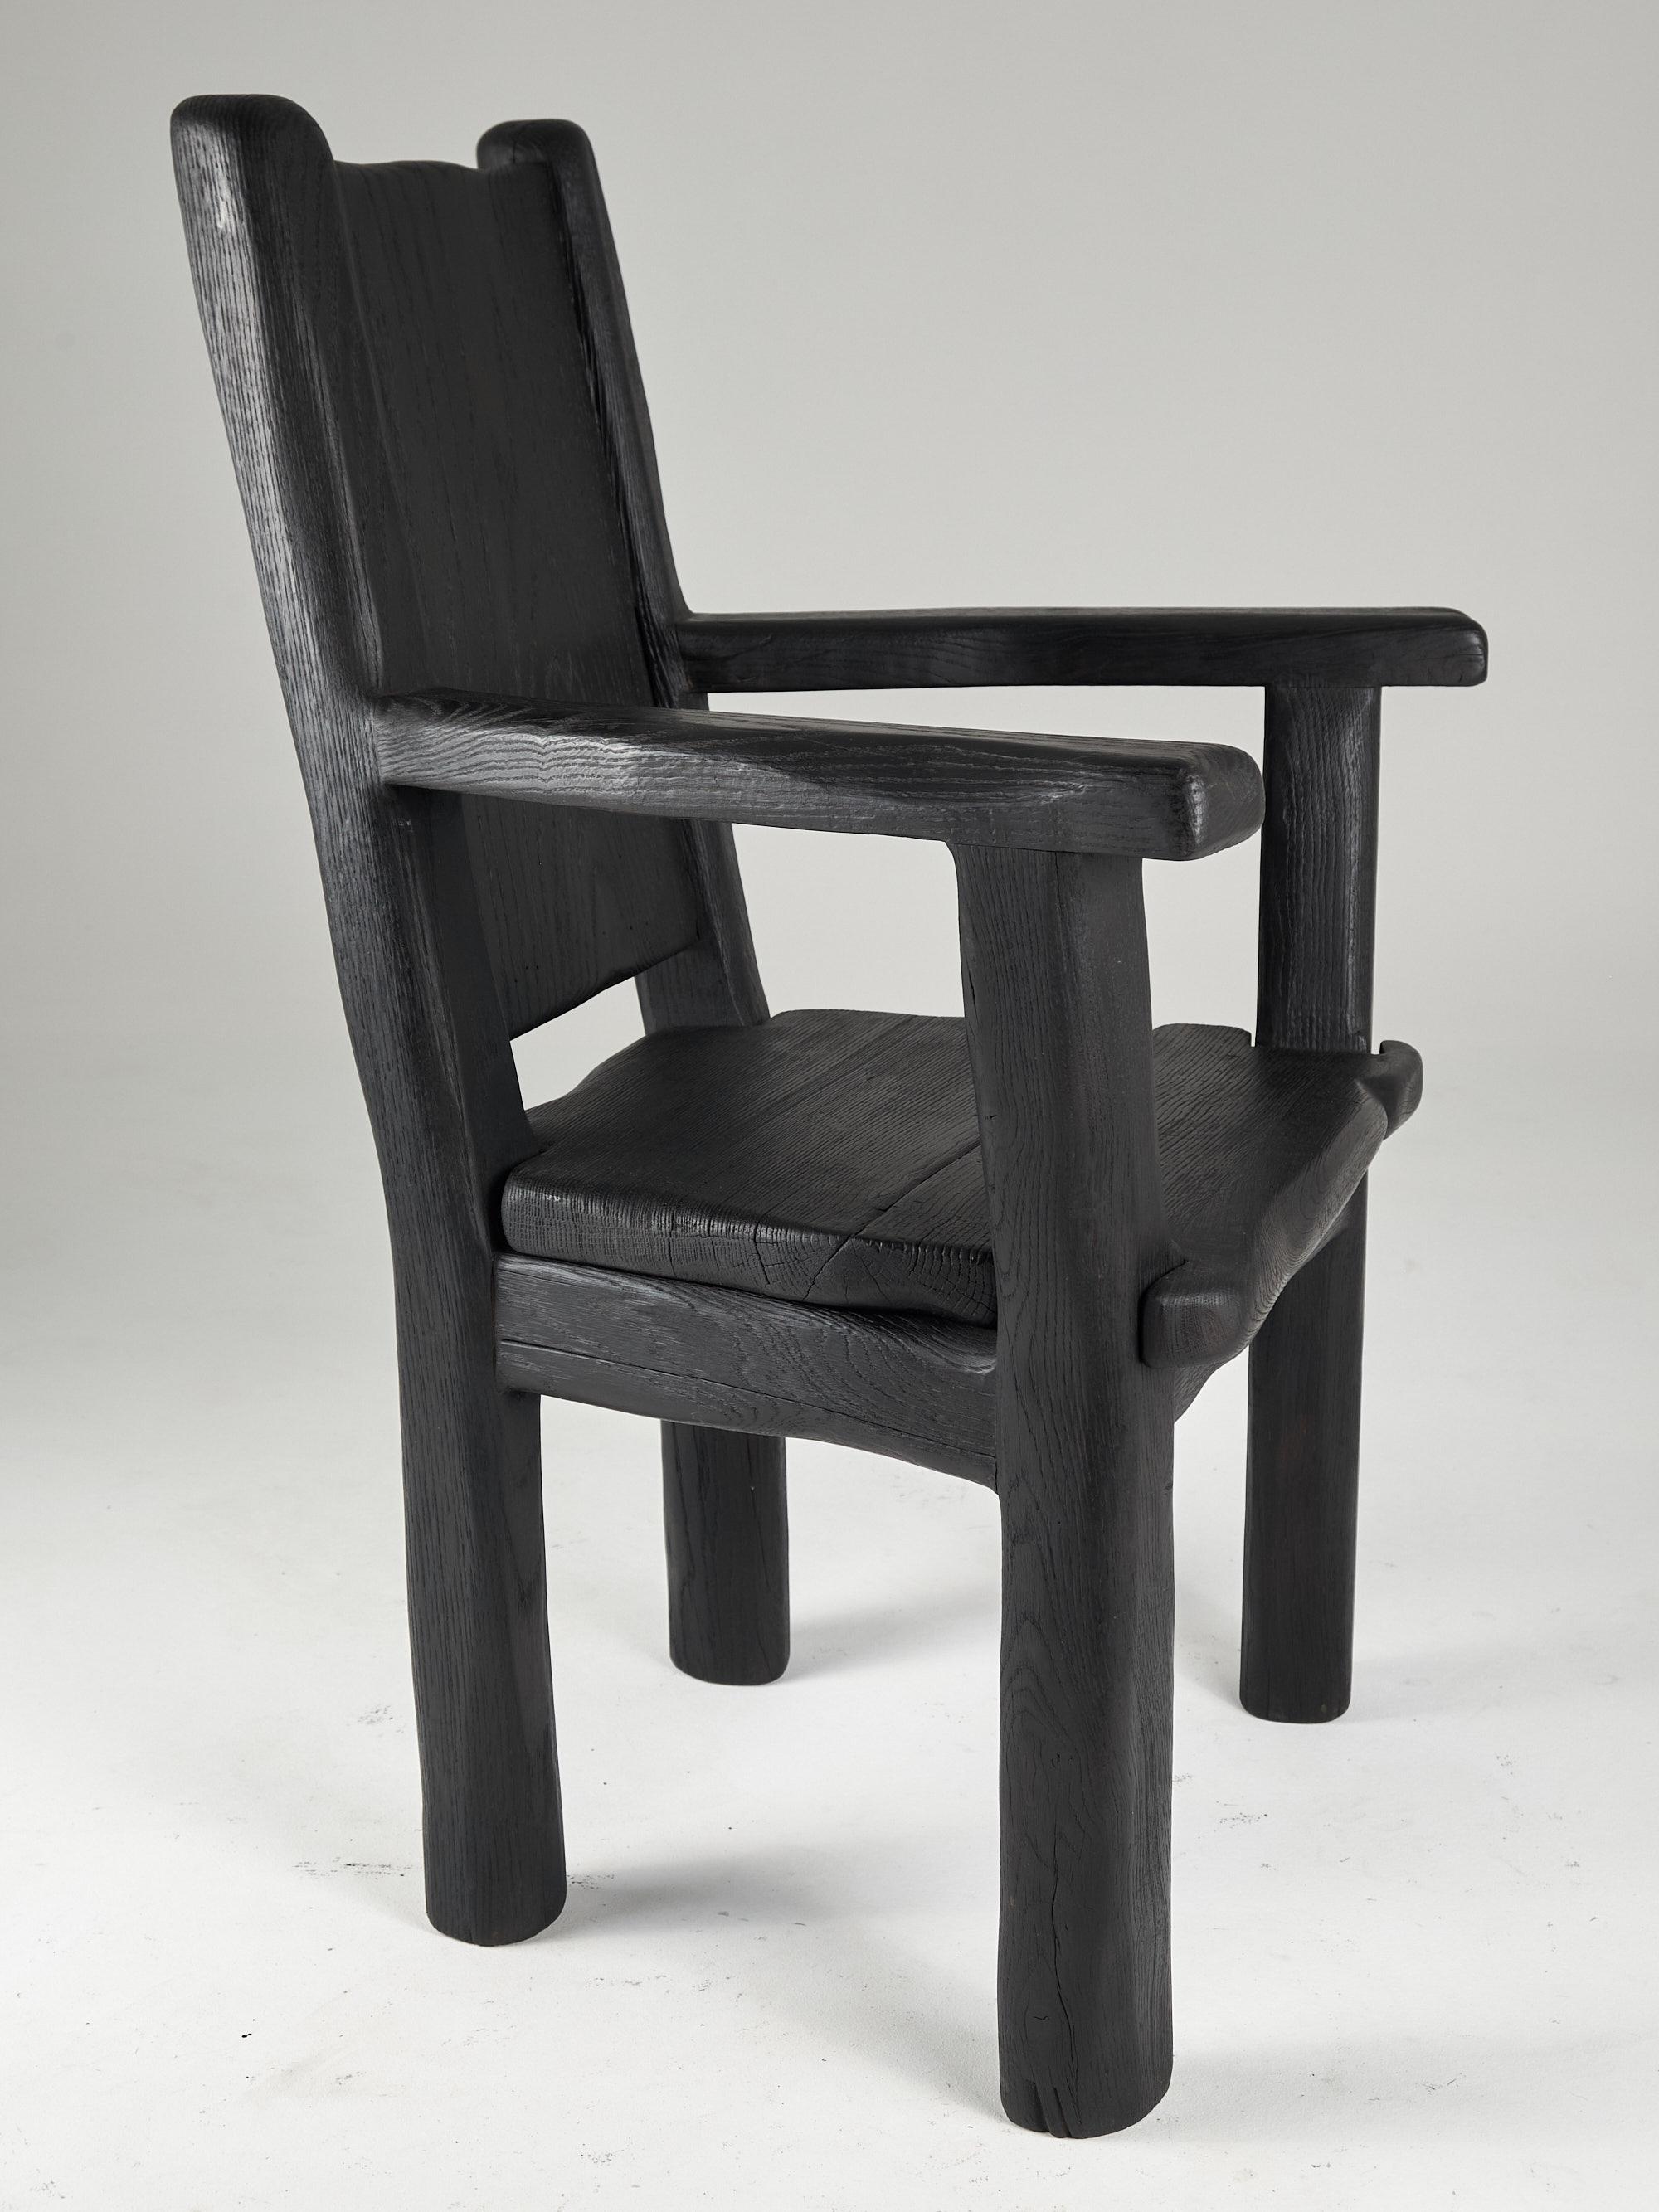 Massive Oak Armchair, Rustic, Burnt Black, For Generations to Last For Sale 5